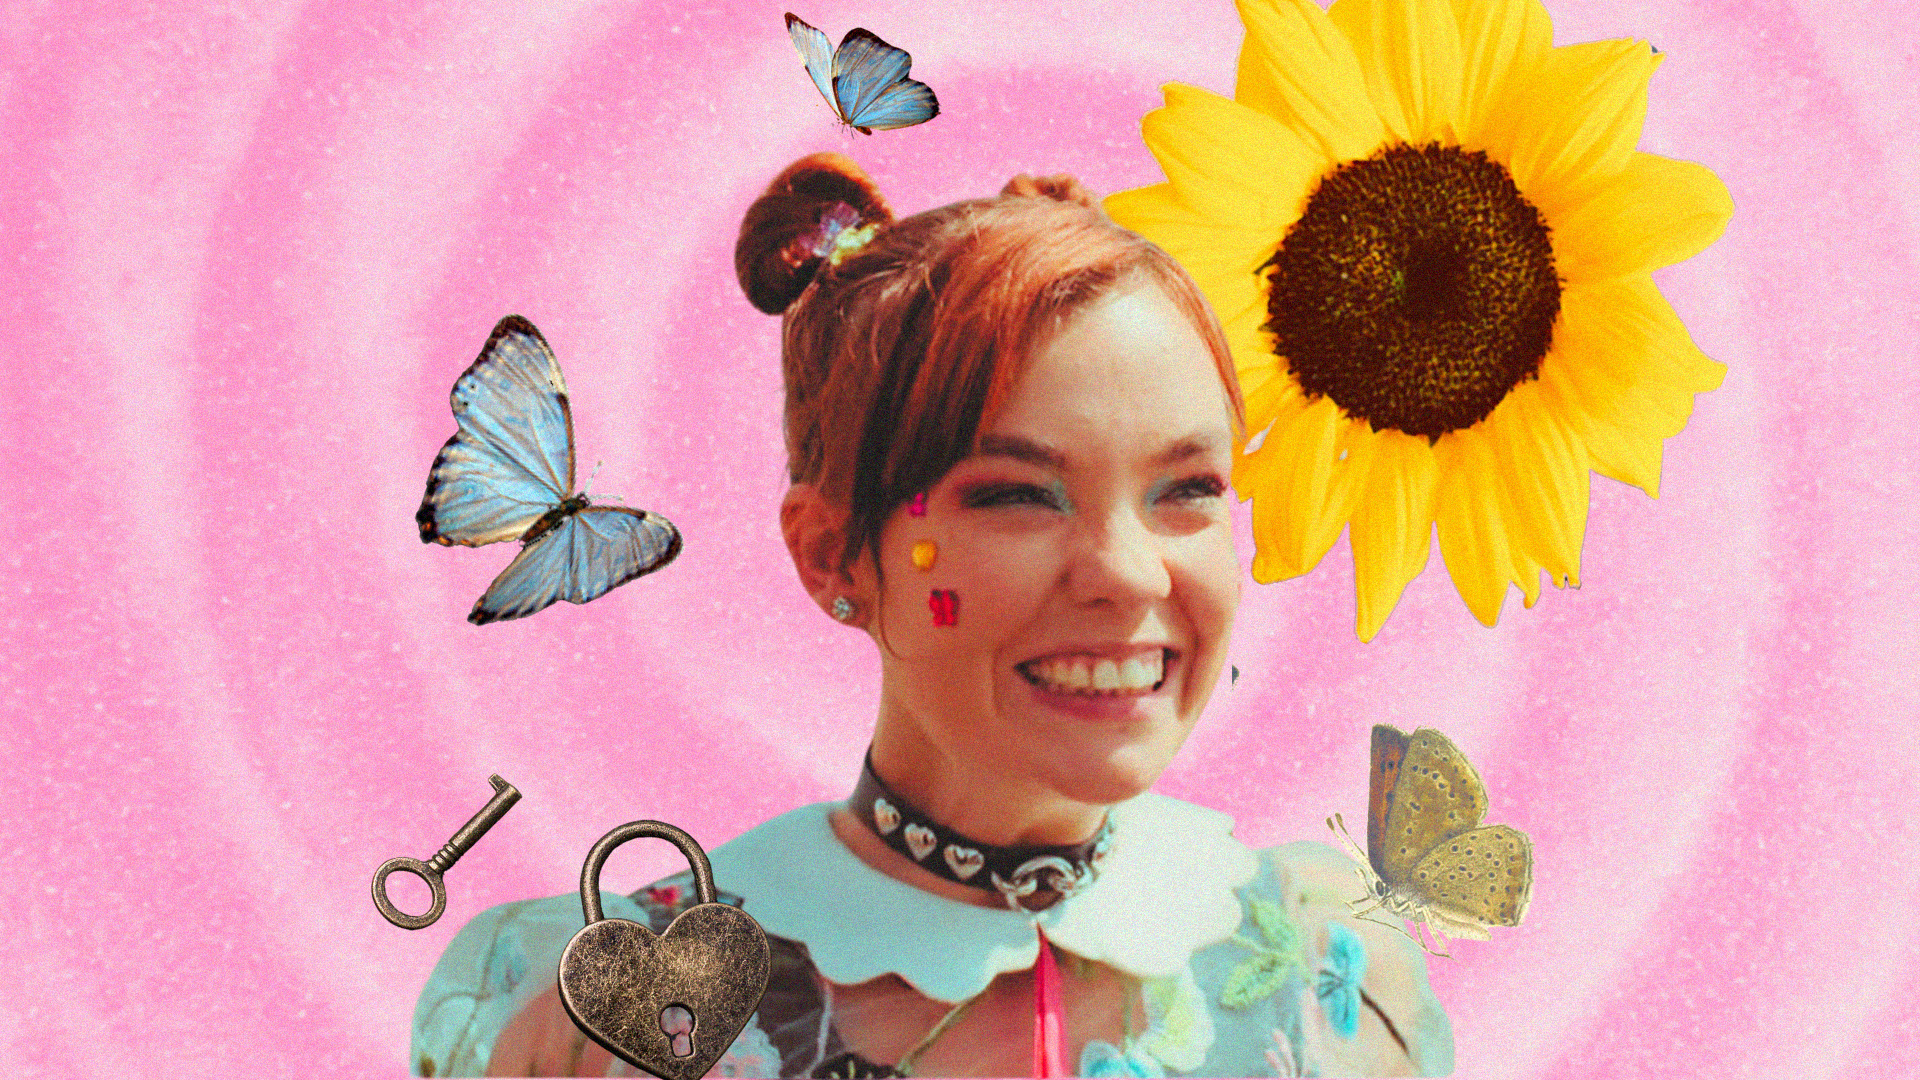 Quinni from Heartbreak High wears space buns and a cheesy grin. There are butterflies, sunflower and lock and key surrounding her image against a pink background.